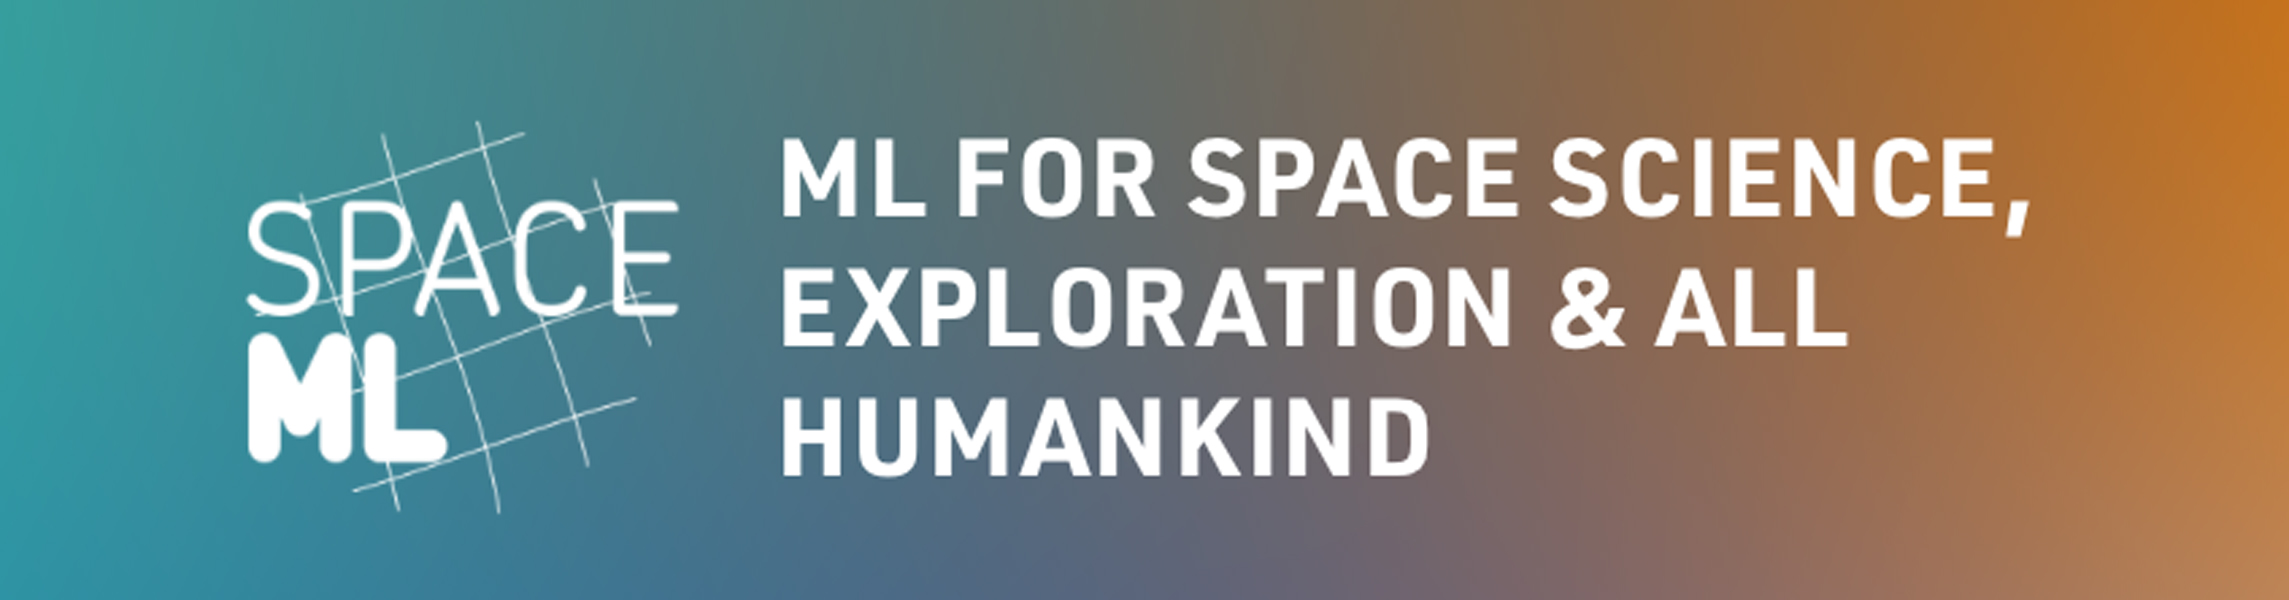 SpaceML.org